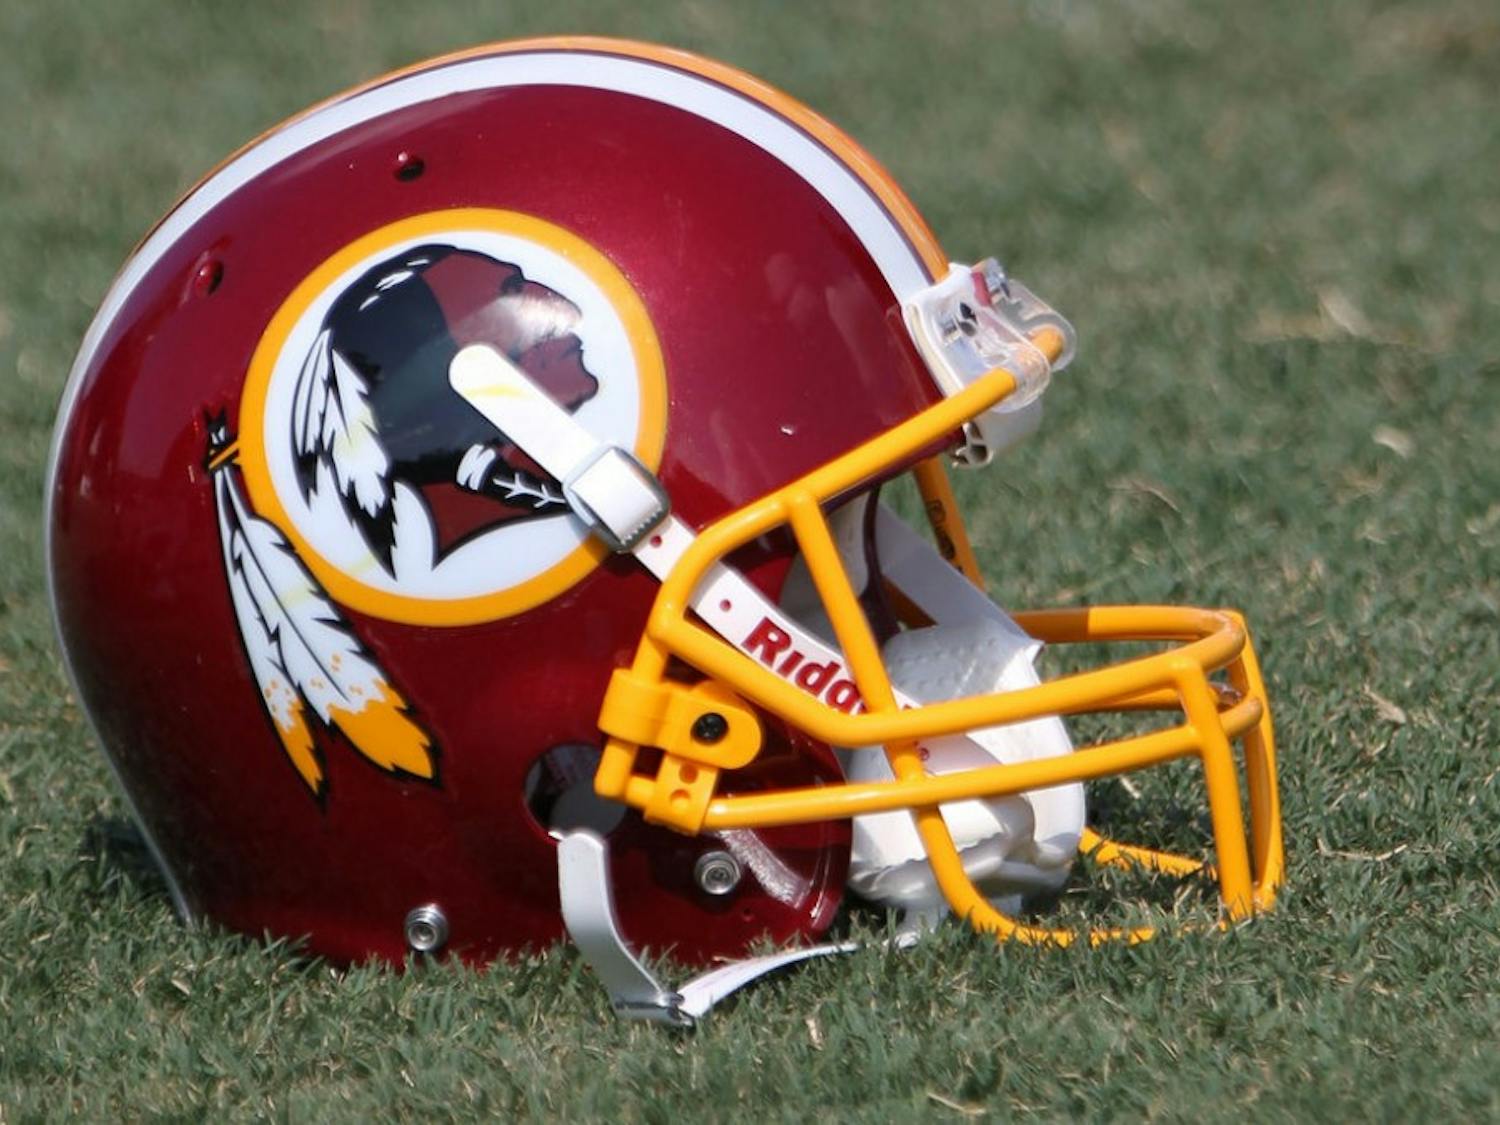 The Redskins' organization claims rights to the NFC Offensive Name of the Week award